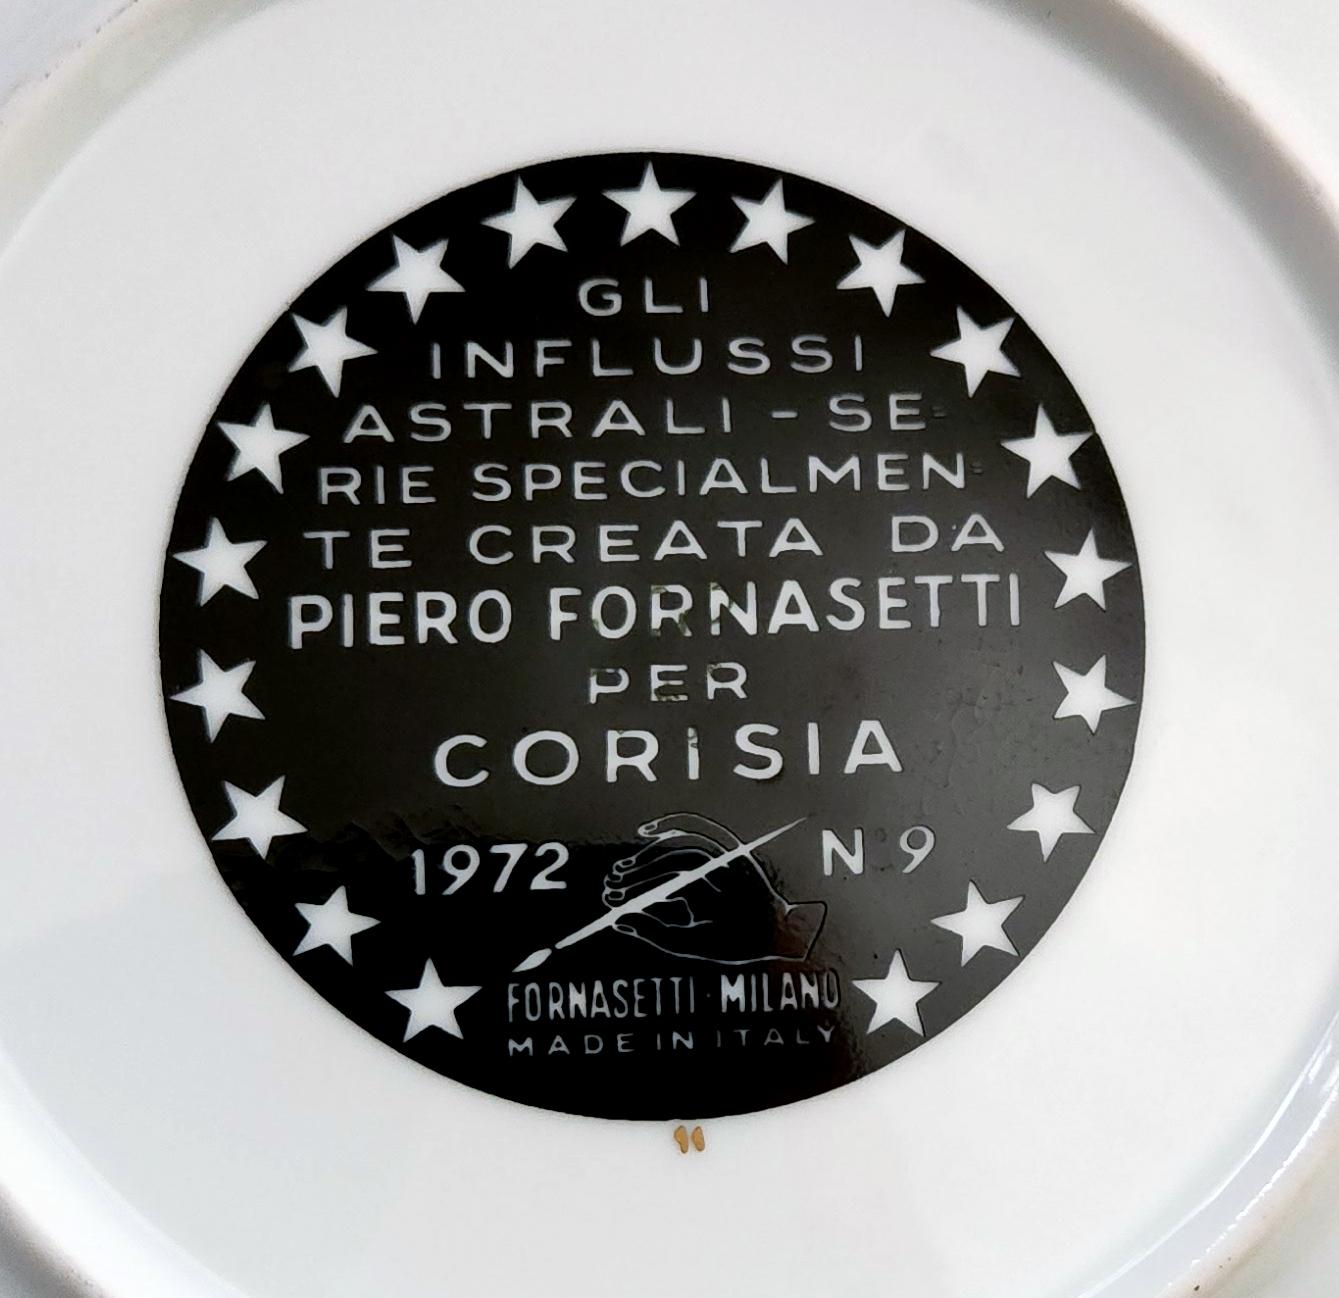 Mid-Century Modern 1972 Piero Fornasetti Porcelain Zodiac Plate, Number 9 Aries, Astrali Pattern For Sale